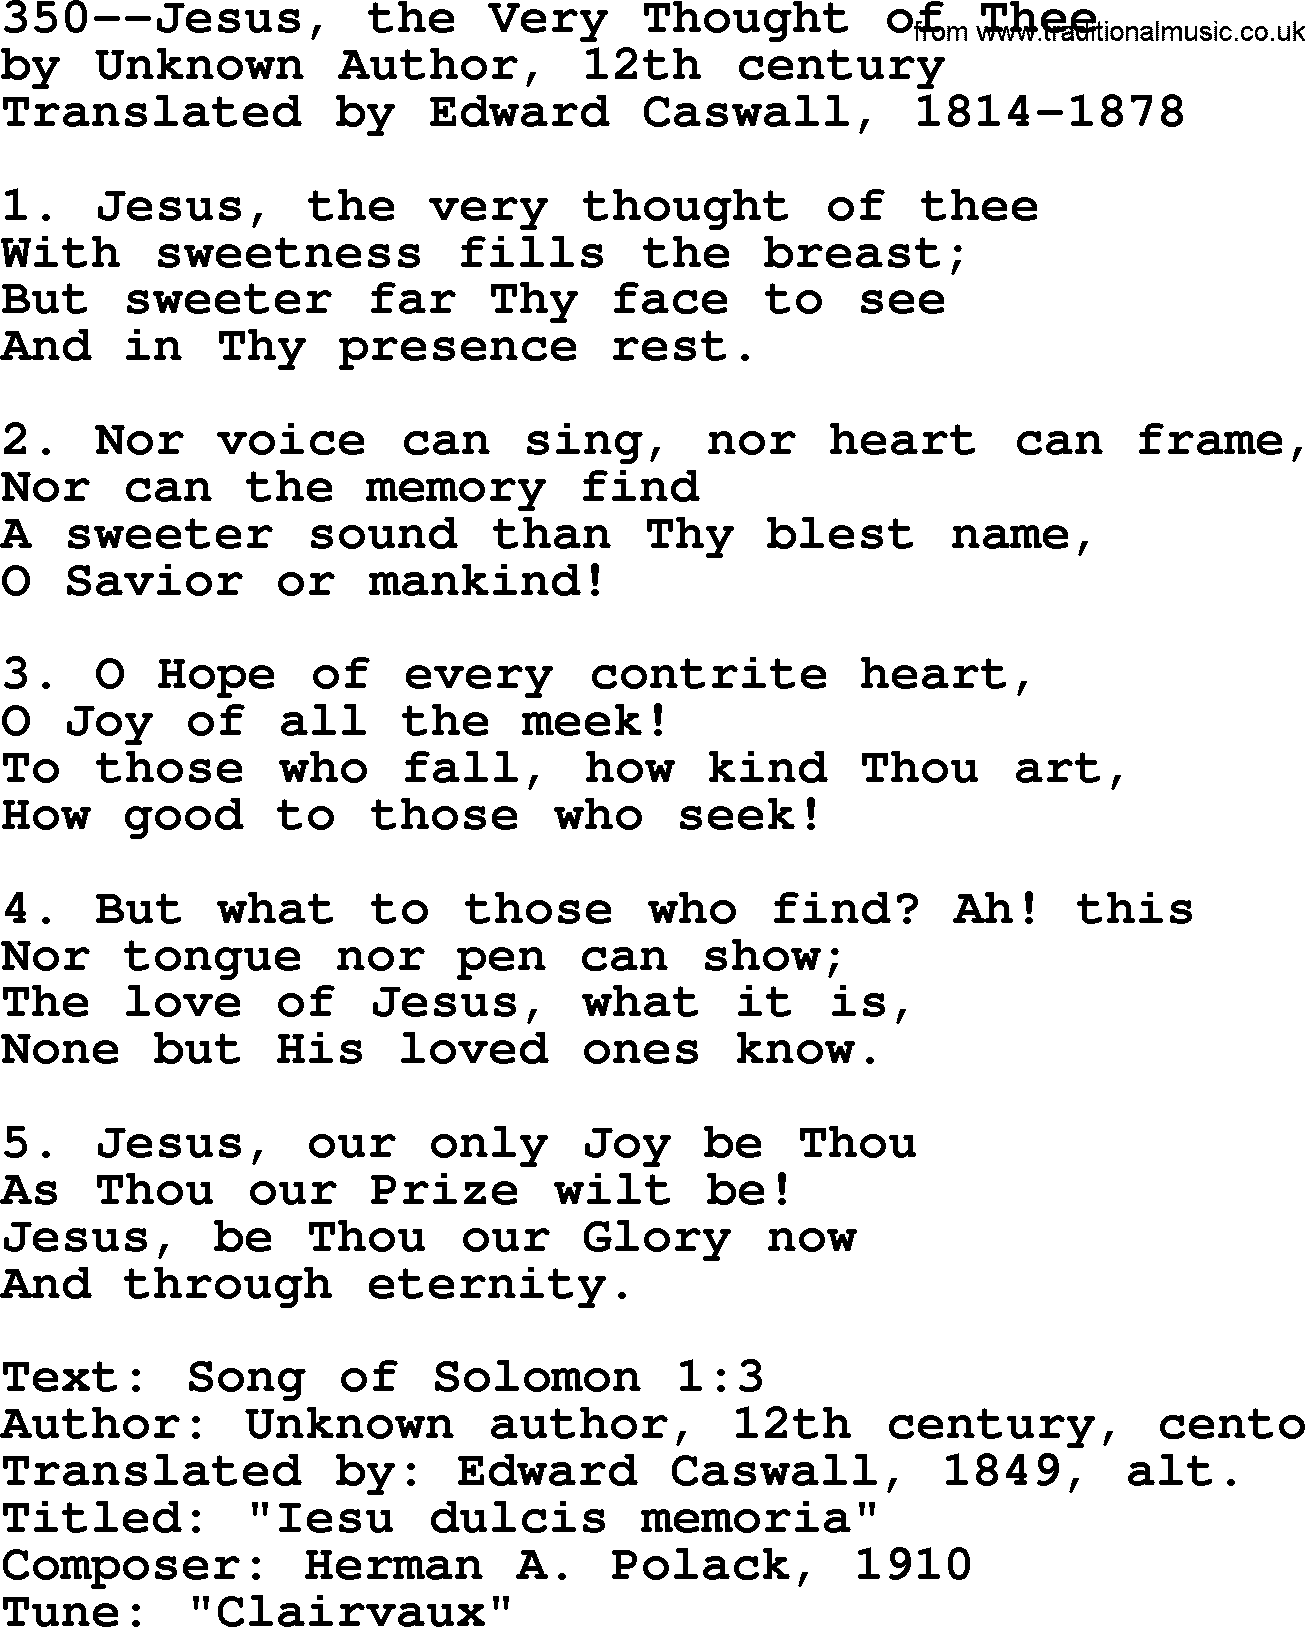 Lutheran Hymn: 350--Jesus, the Very Thought of Thee.txt lyrics with PDF